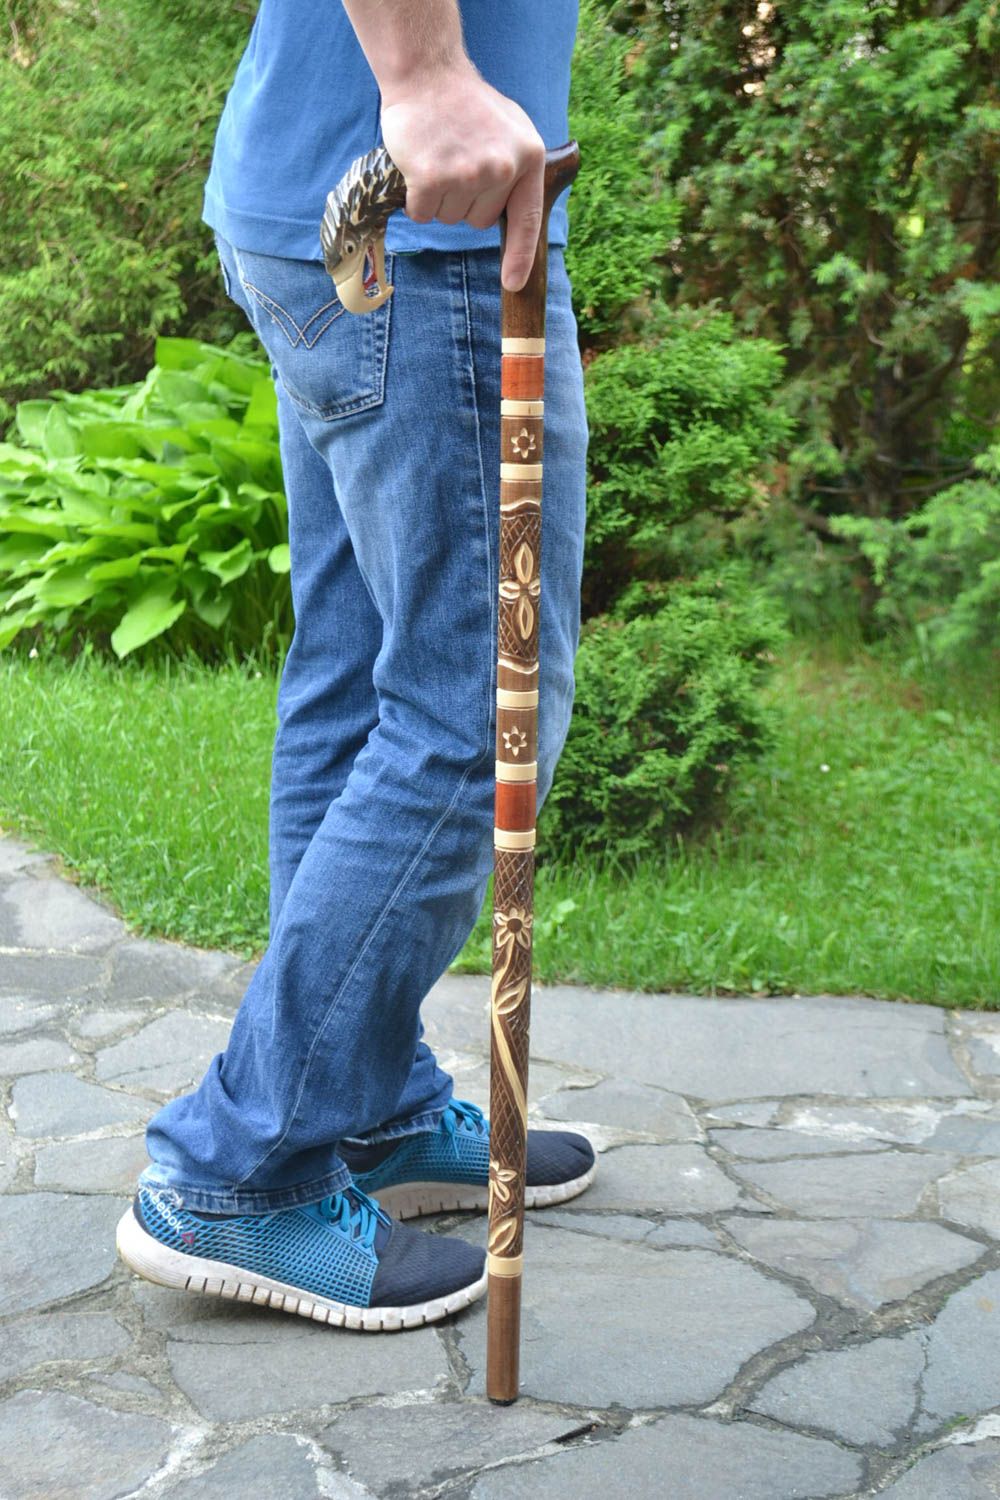 Handmade cane made of wood with knob in the form of eagle stylish walking stick photo 1